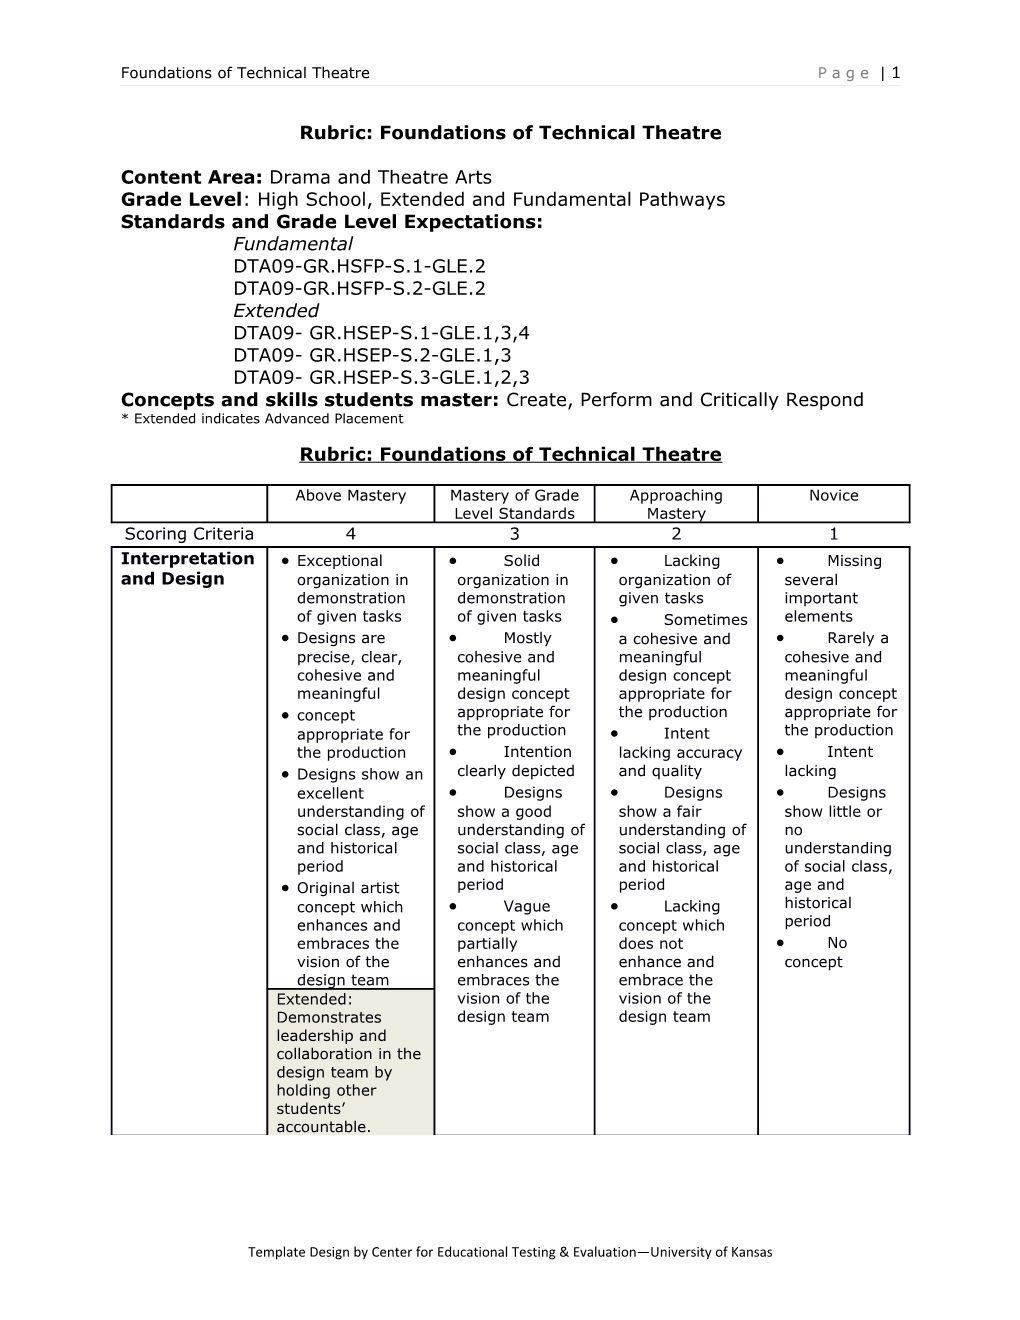 Rubric: Foundations of Technical Theatre